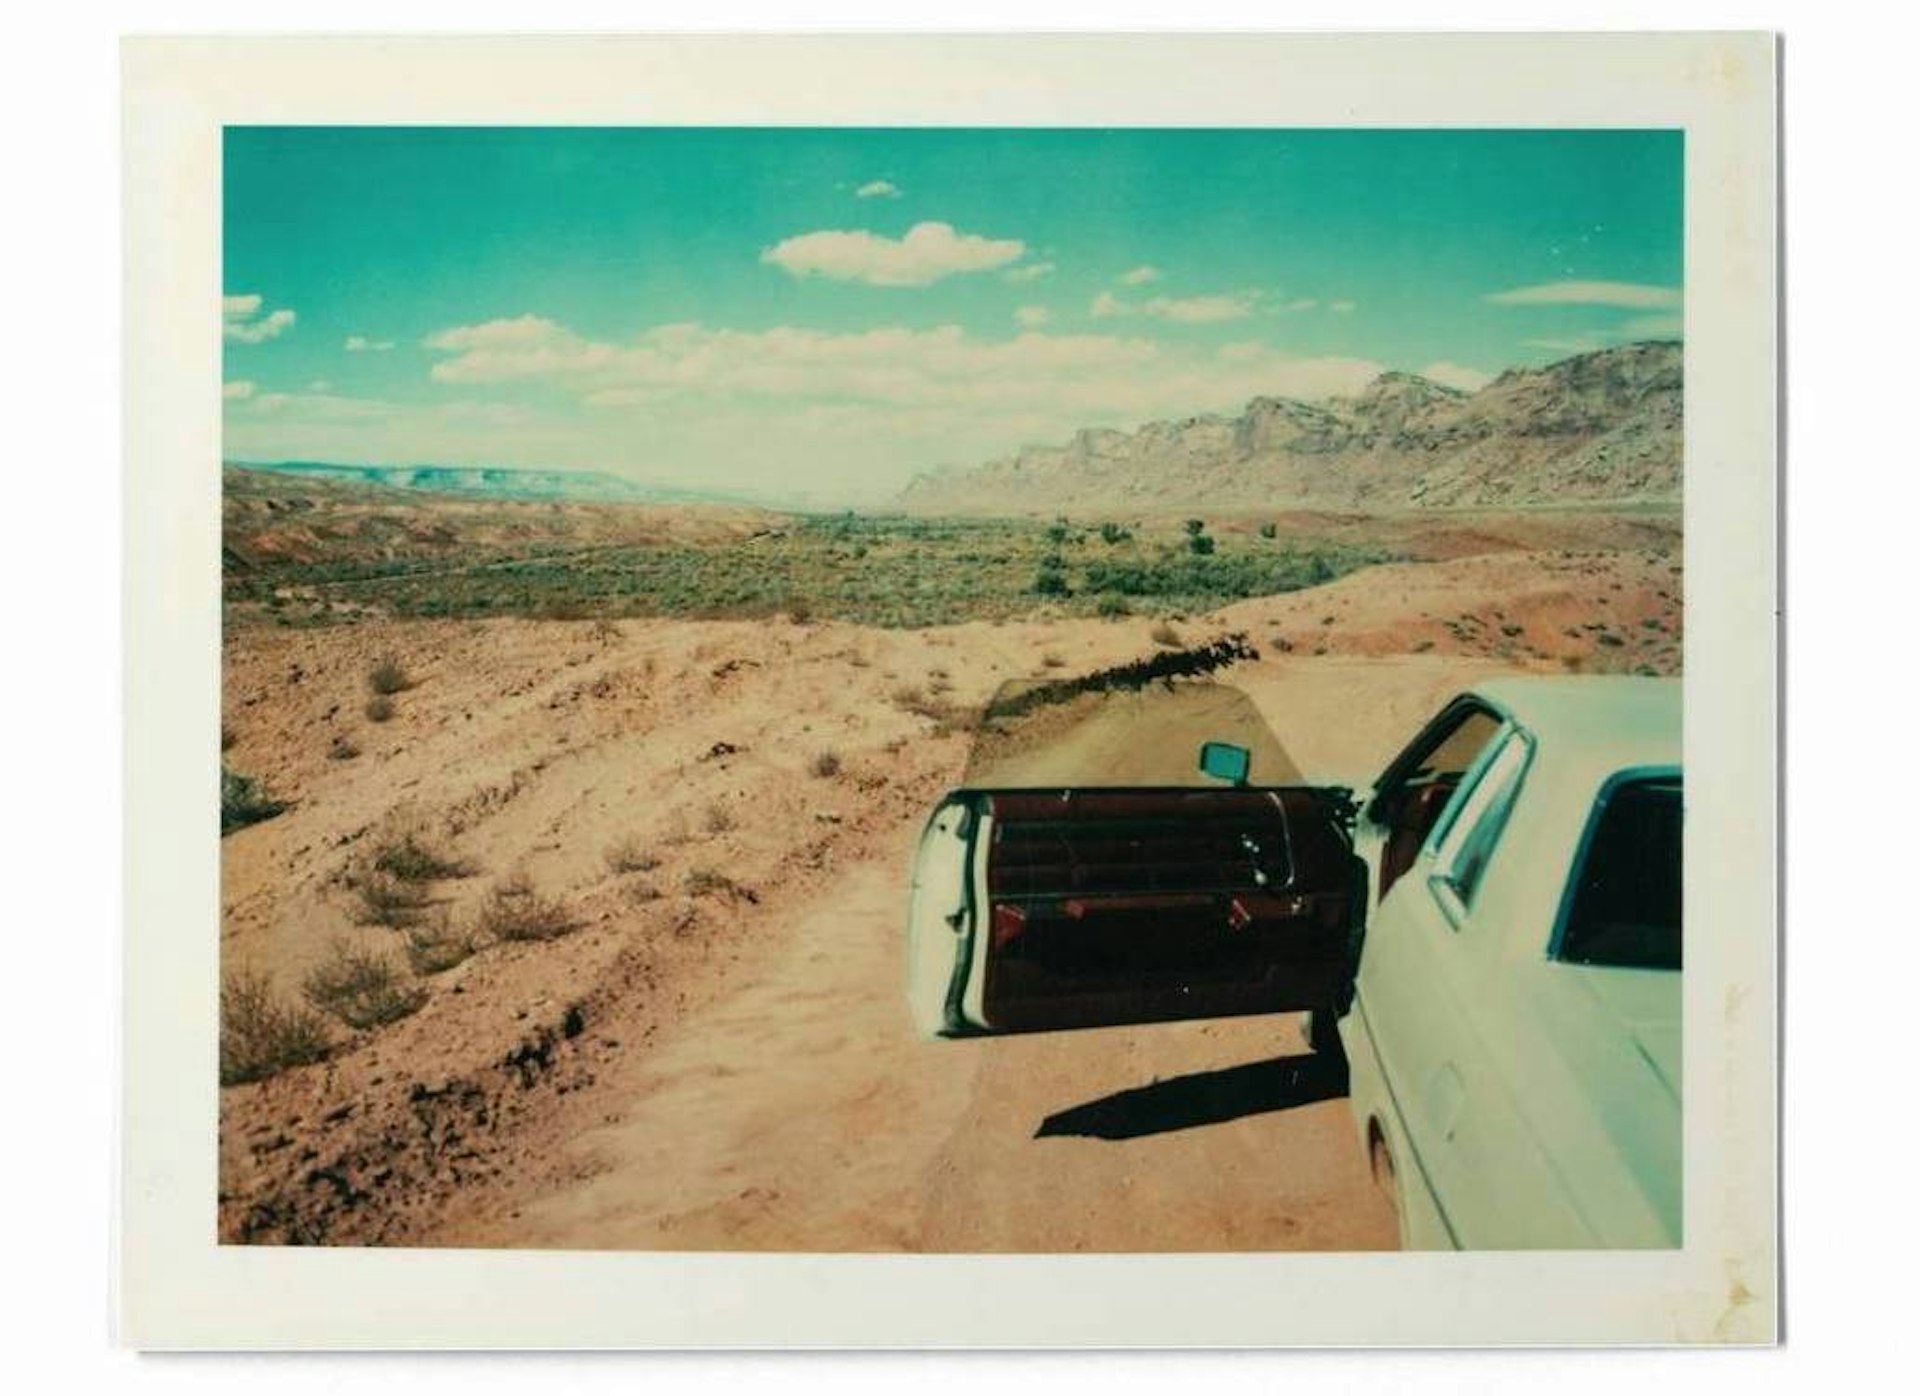 Wim Wenders’ dreamy Polaroid collection is coming to London